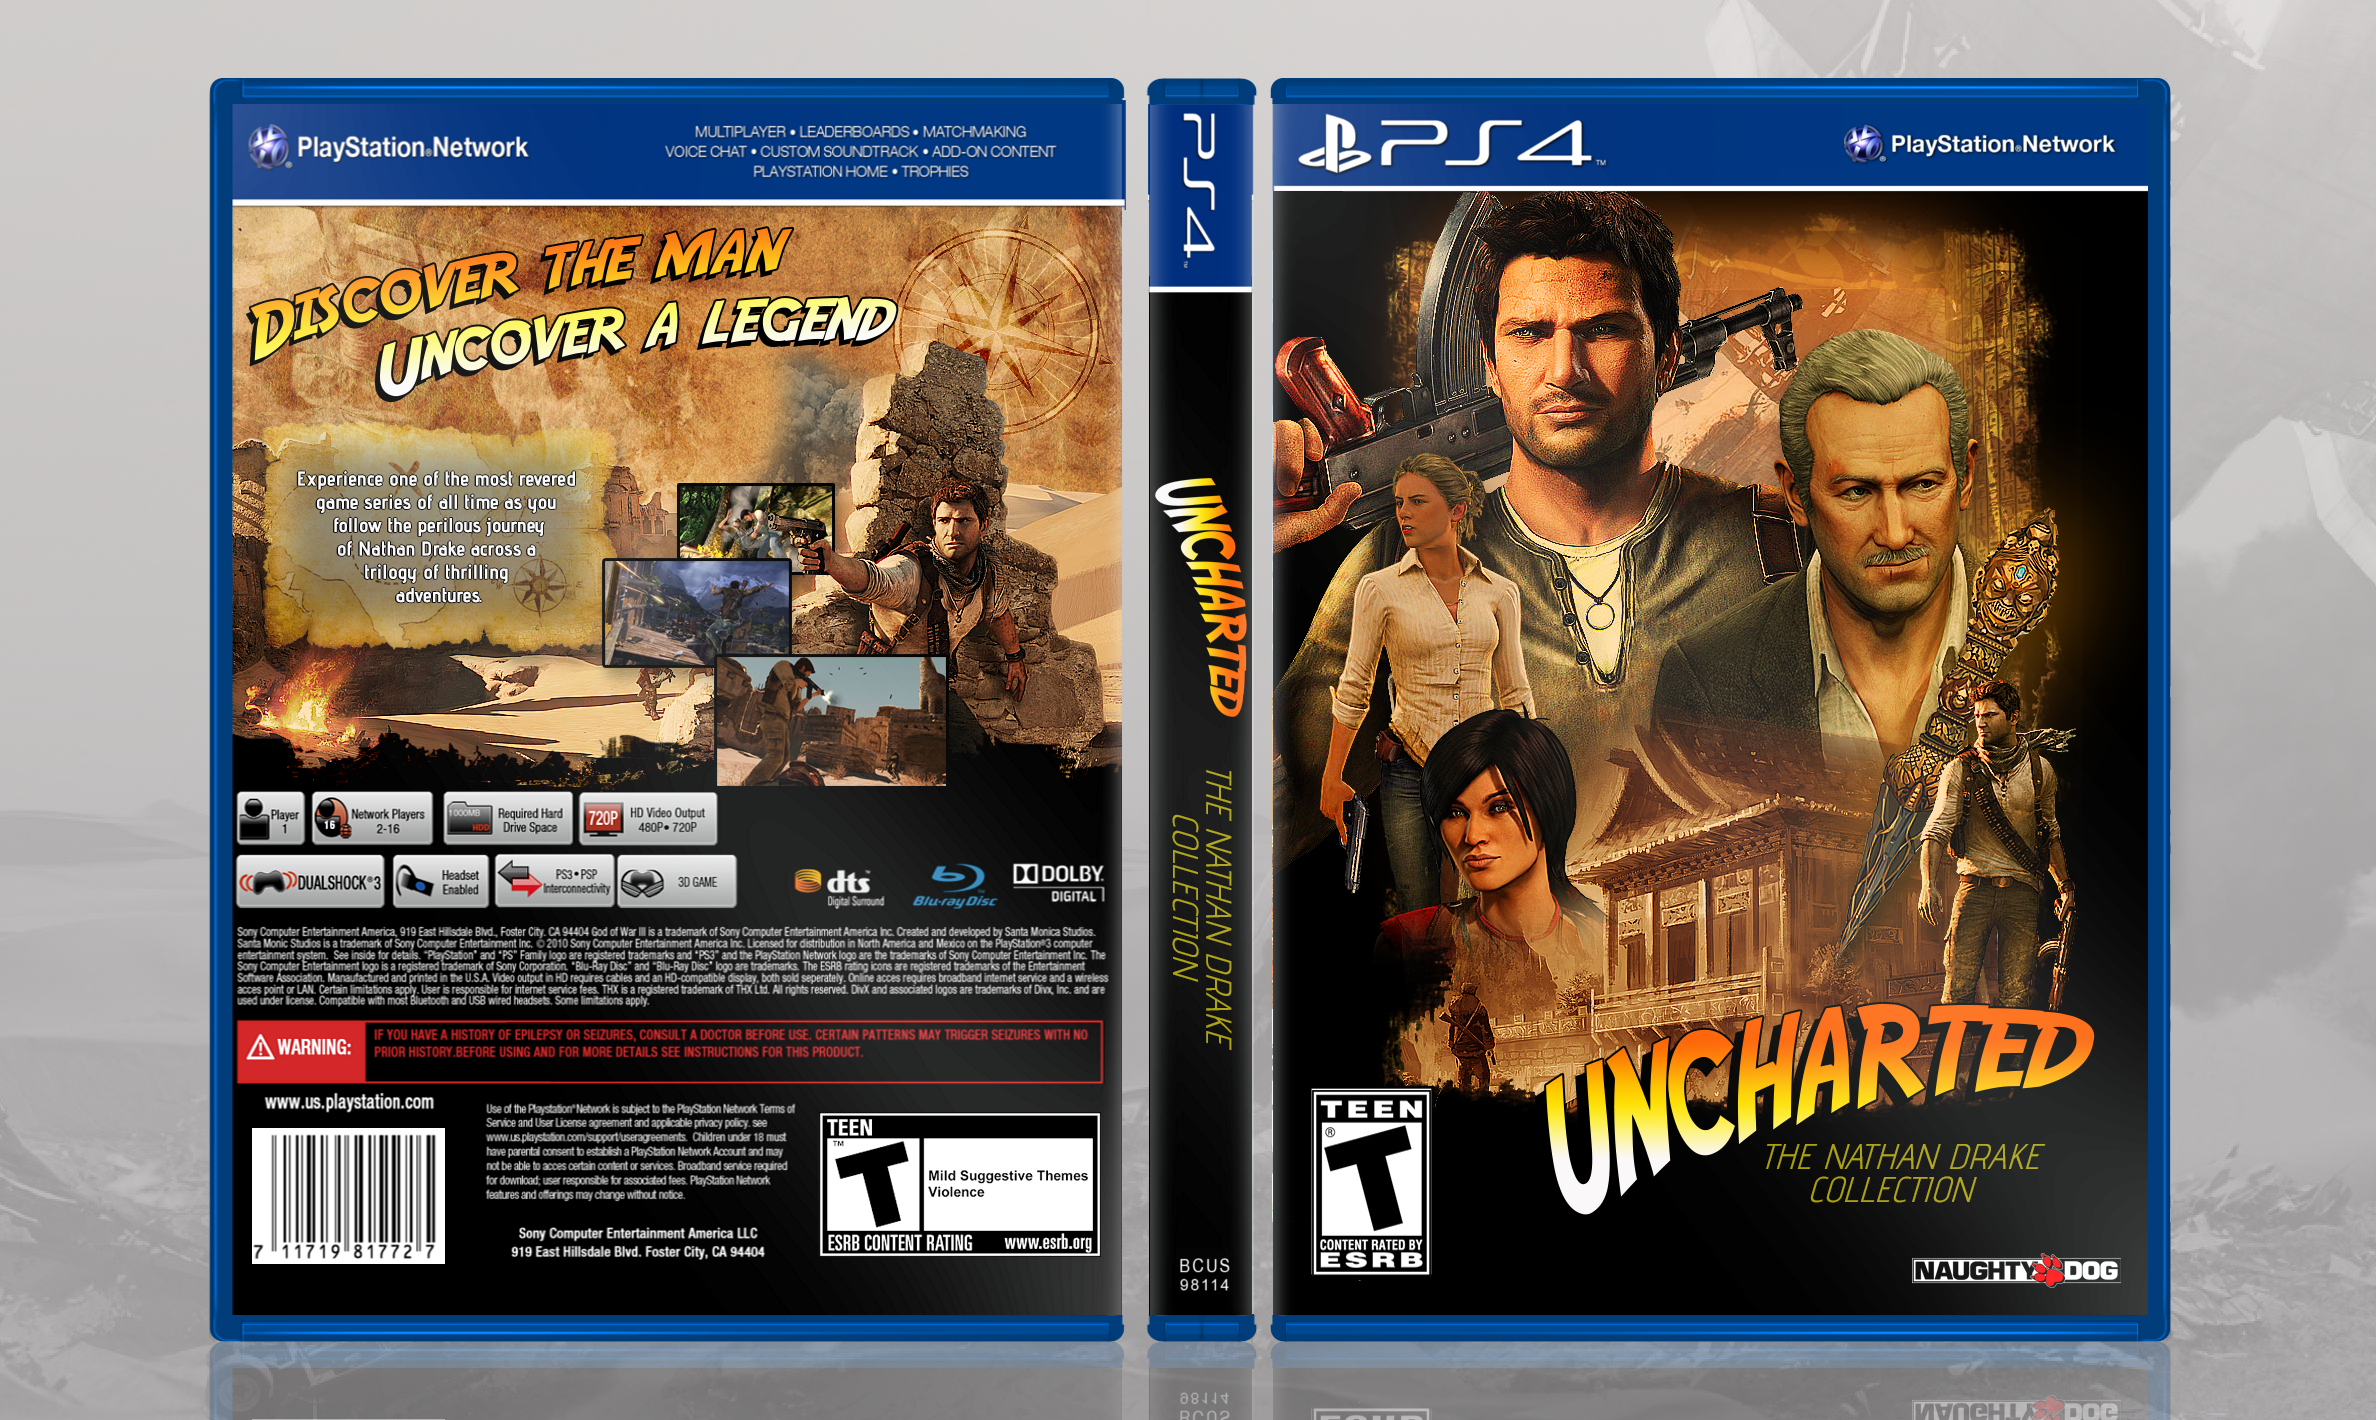 Uncharted: The Nathan Drake Collection box cover